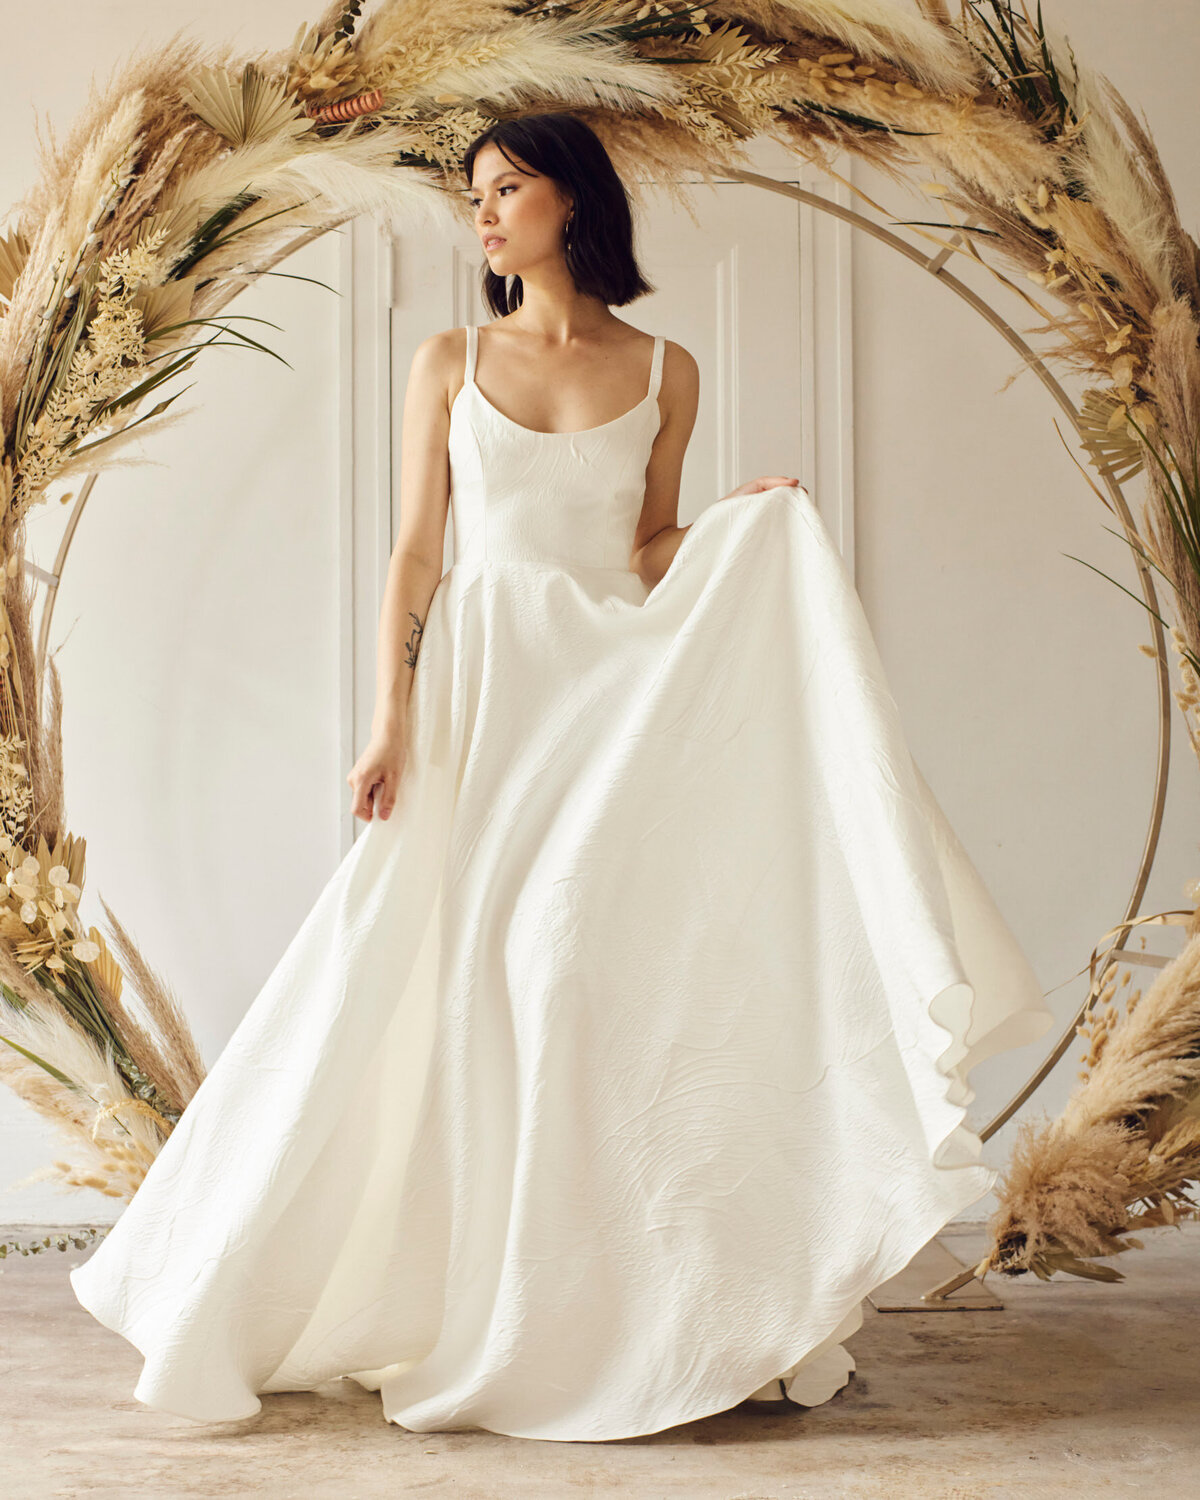 Simple and classic bridal gown from Lovenote Bride, a modern bridal boutique based in Calgary + Vancouver. Featured on the Brontë Bride Vendor Guide.